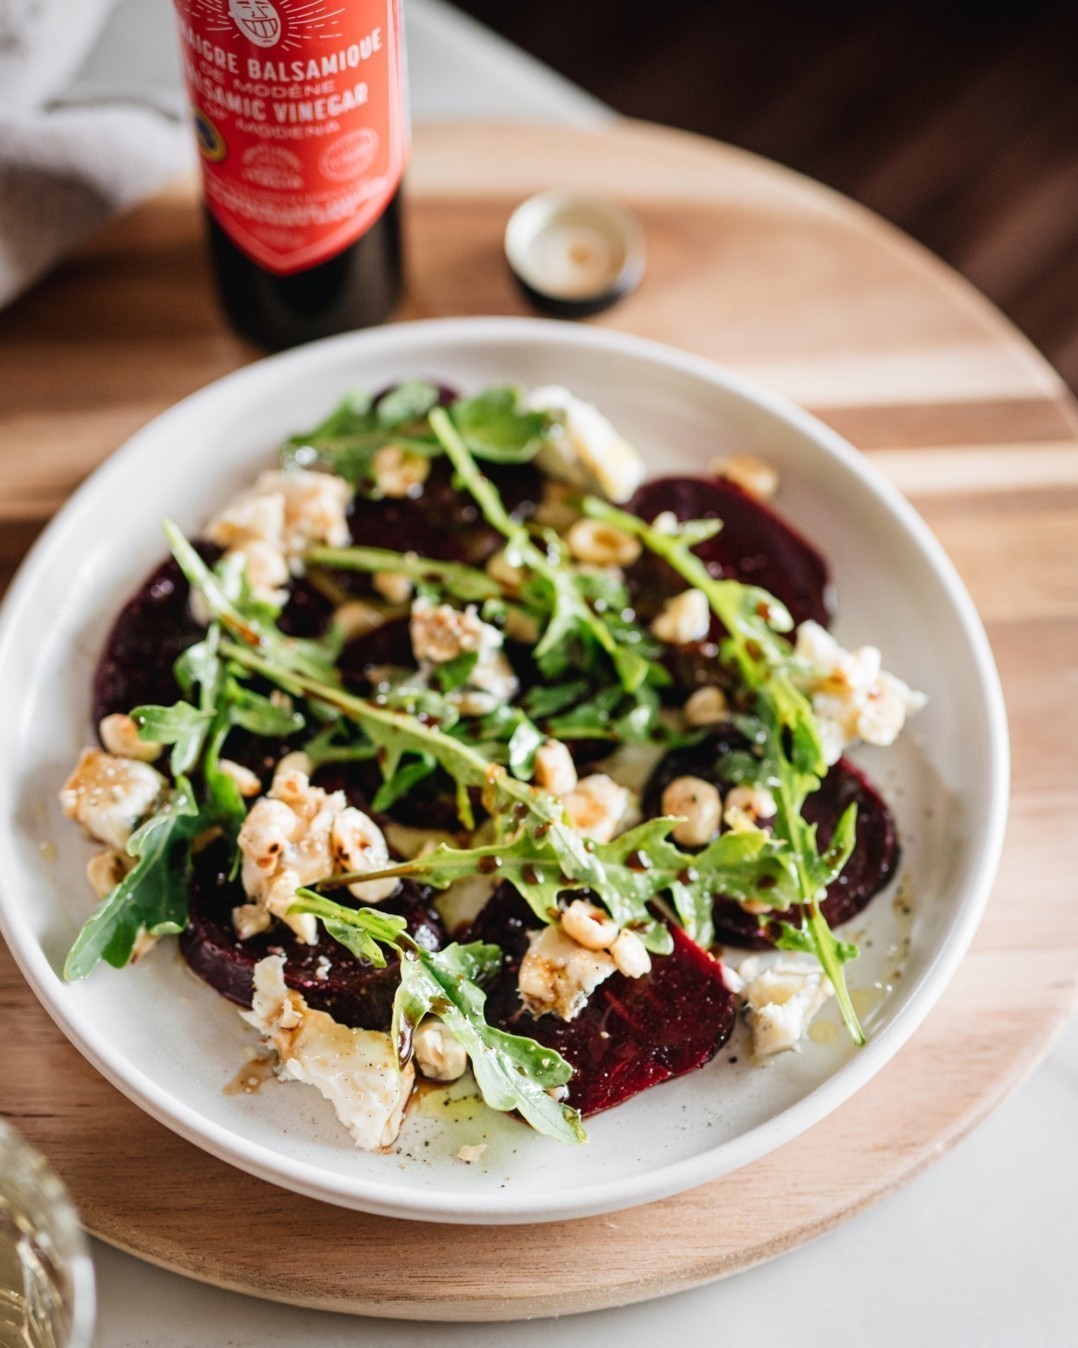 Roasted beets with gorgonzola and balsamic vinaigrette